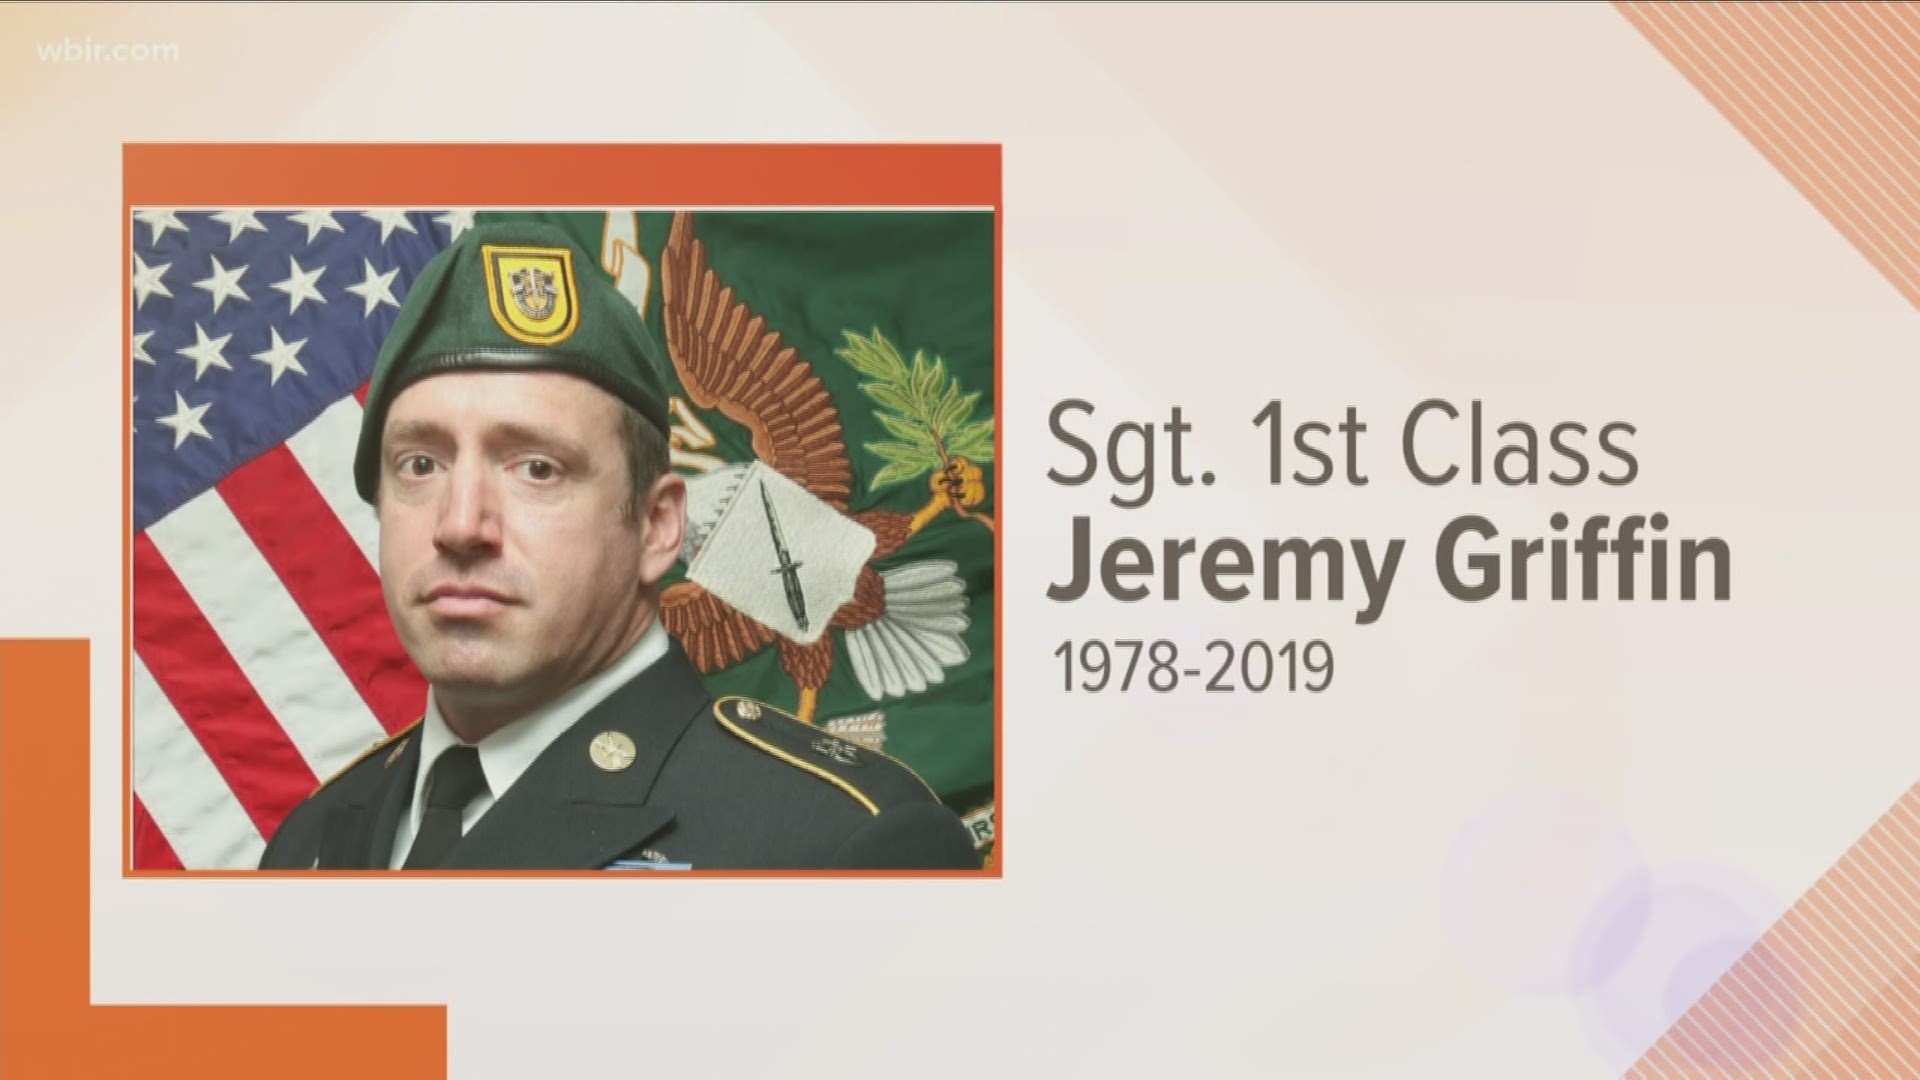 A Green Beret from Tennessee was killed in Afghanistan on Monday. The Department of Defense said Sgt. 1st Class Jeremy W. Griffin was killed in action. He was 40 years old.